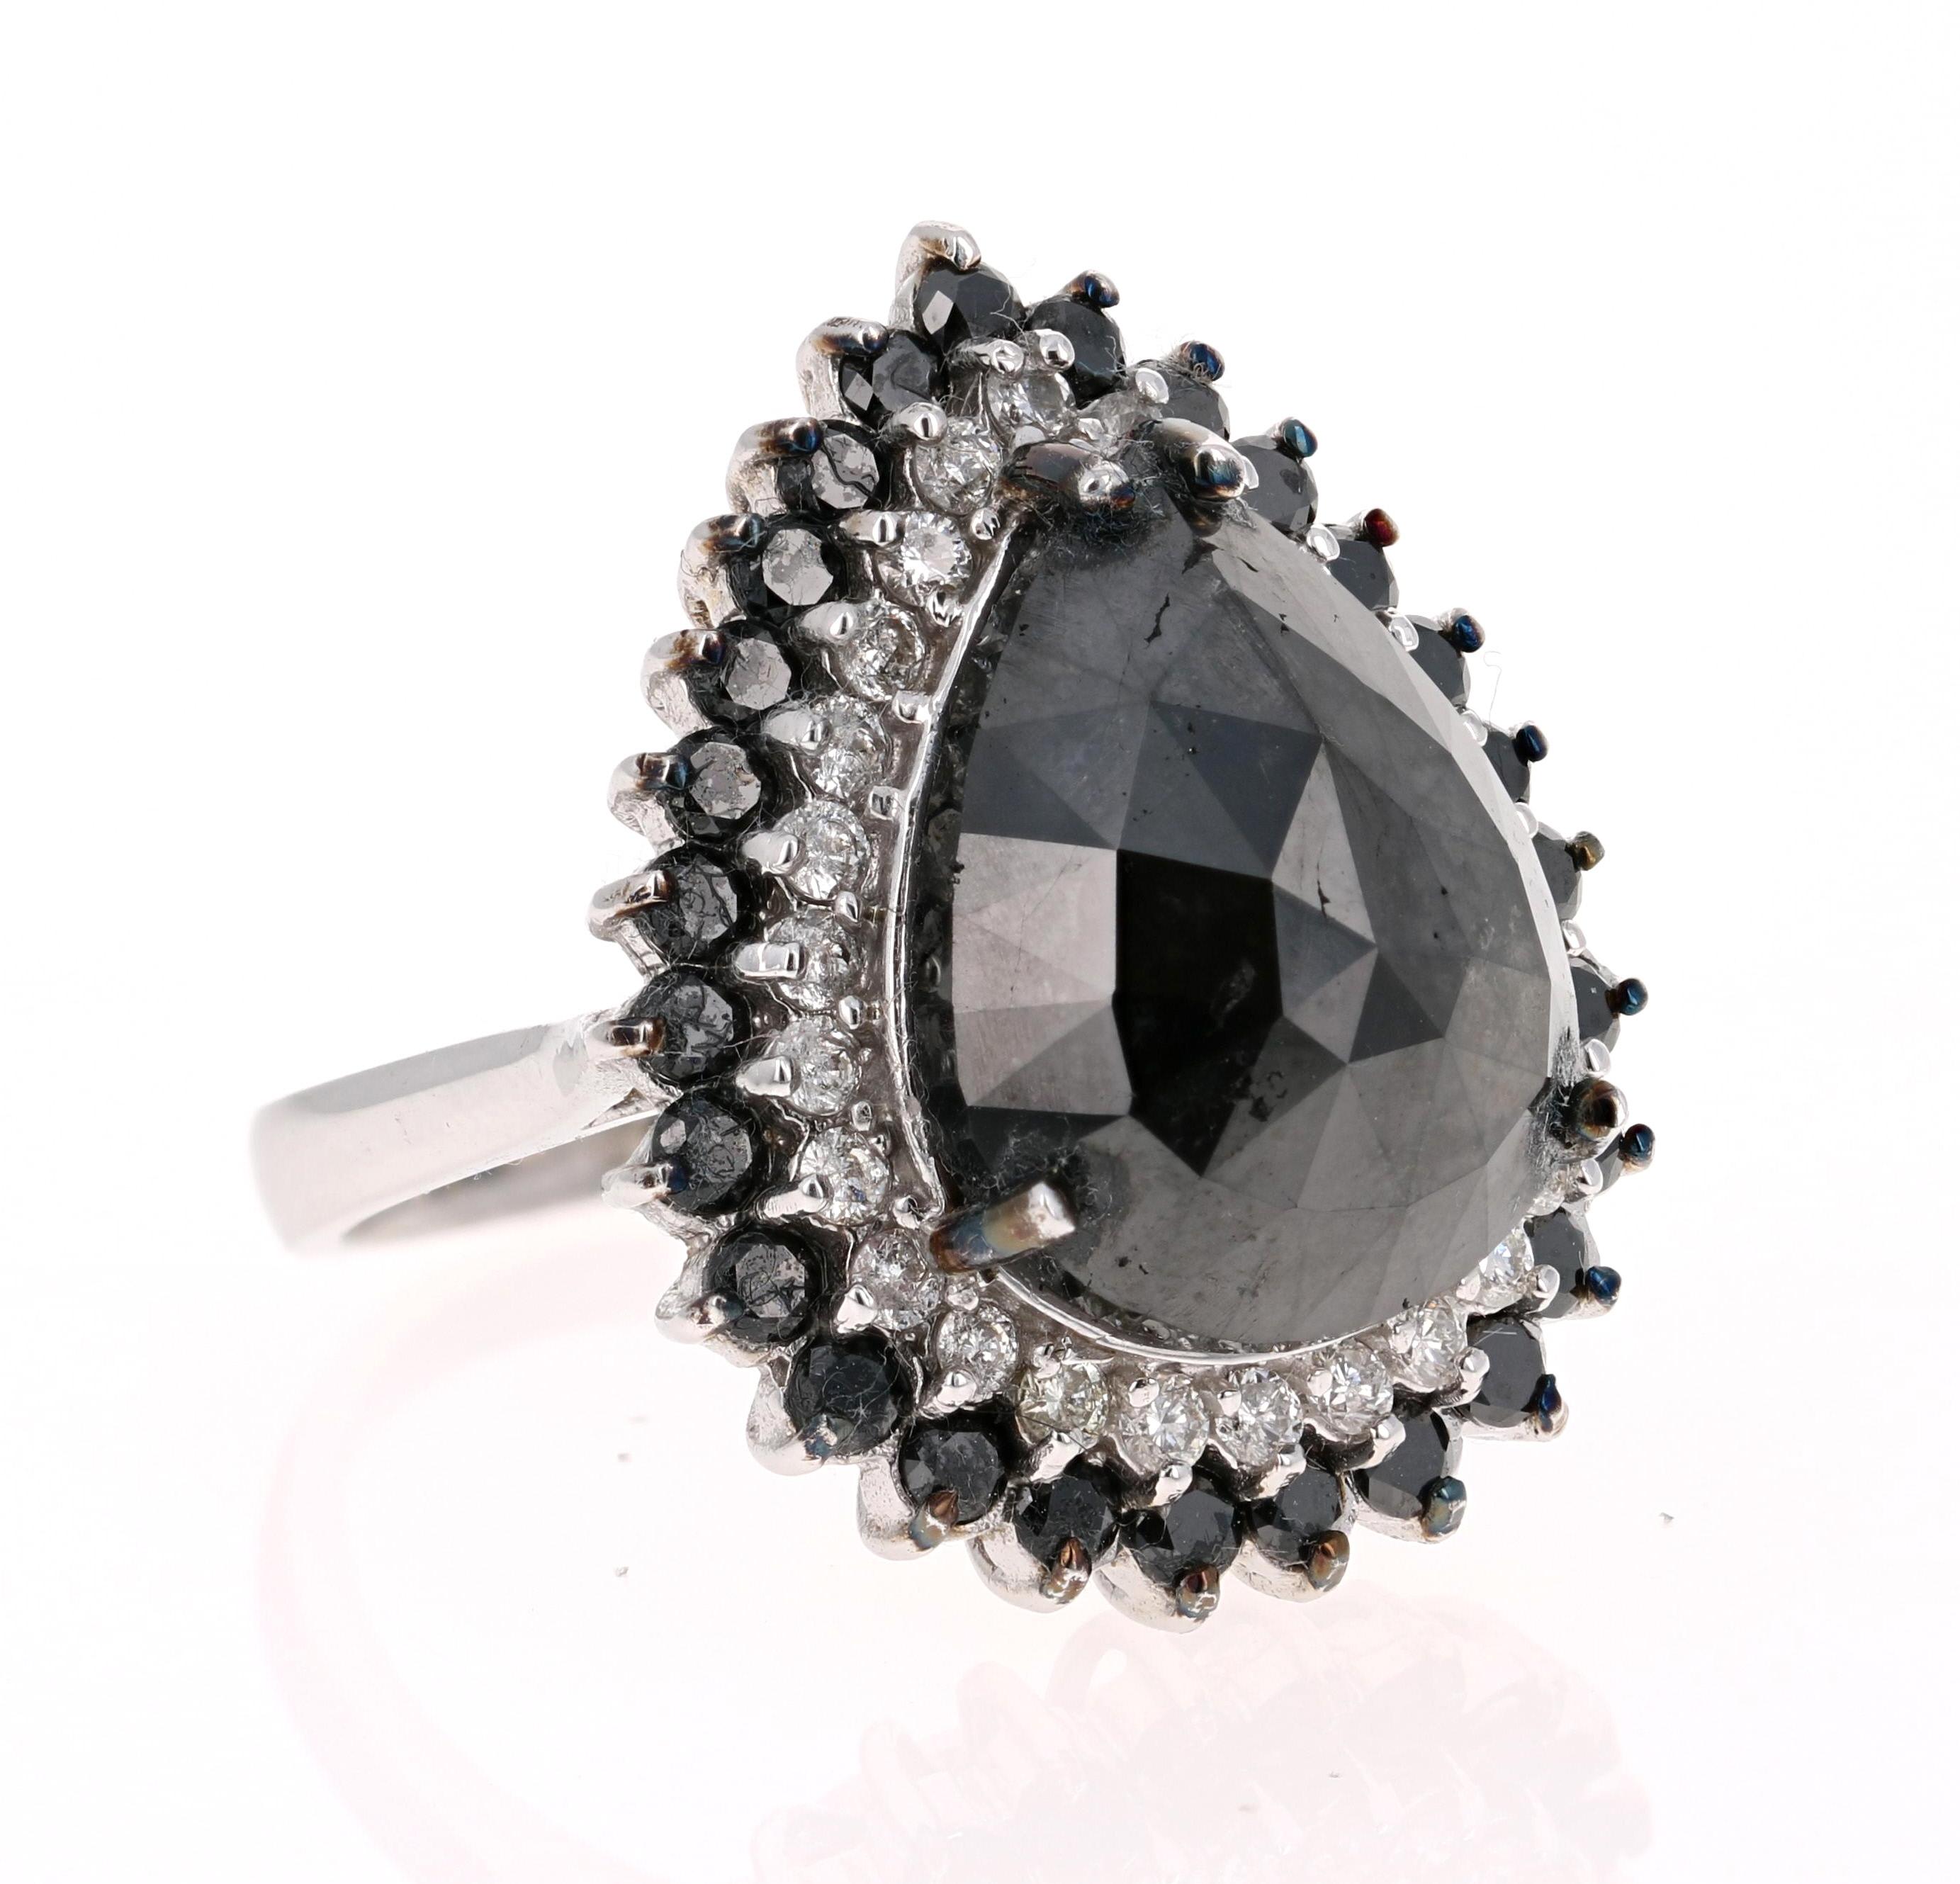 This Black and White Diamond Cocktail Ring is simply a Stunning Beauty! 

The Pear Cut Black Diamond is 13.25 Carats and is surrounded by a halo of 26 Round Cut Diamonds weighing 0.63 Carats. Additionally it has 27 Black Round Cut Diamonds that